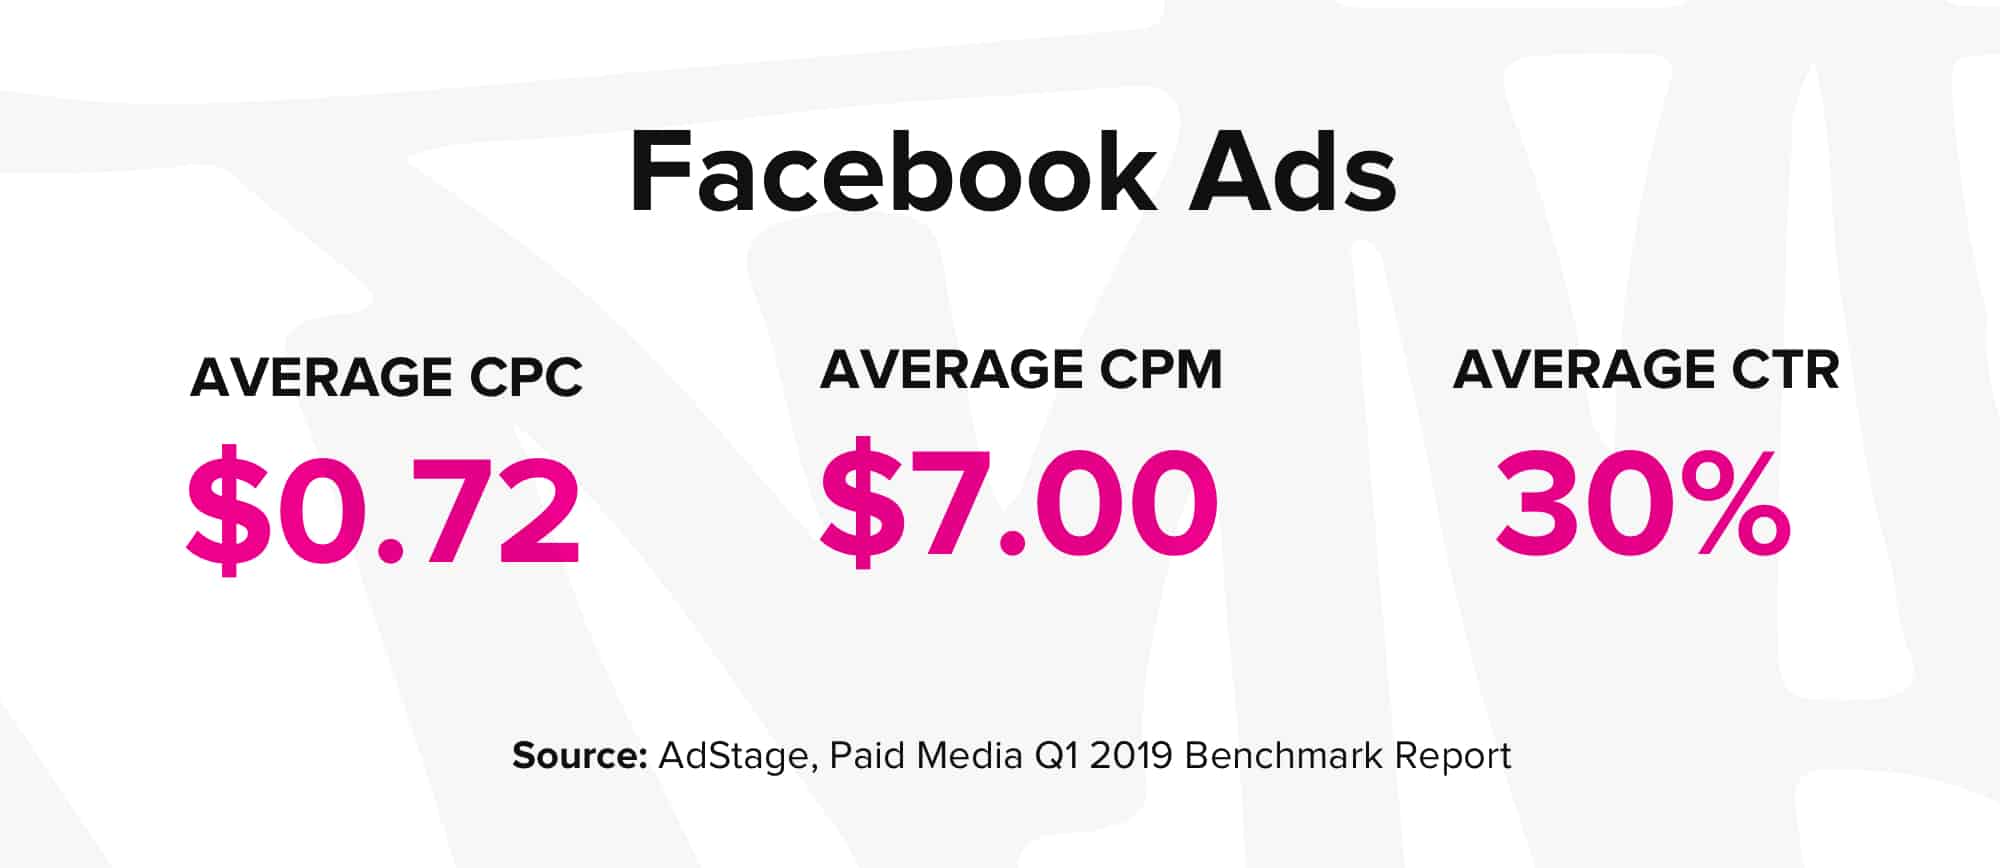 Advertising Trends: CPM Benchmarks by Industry [Study]